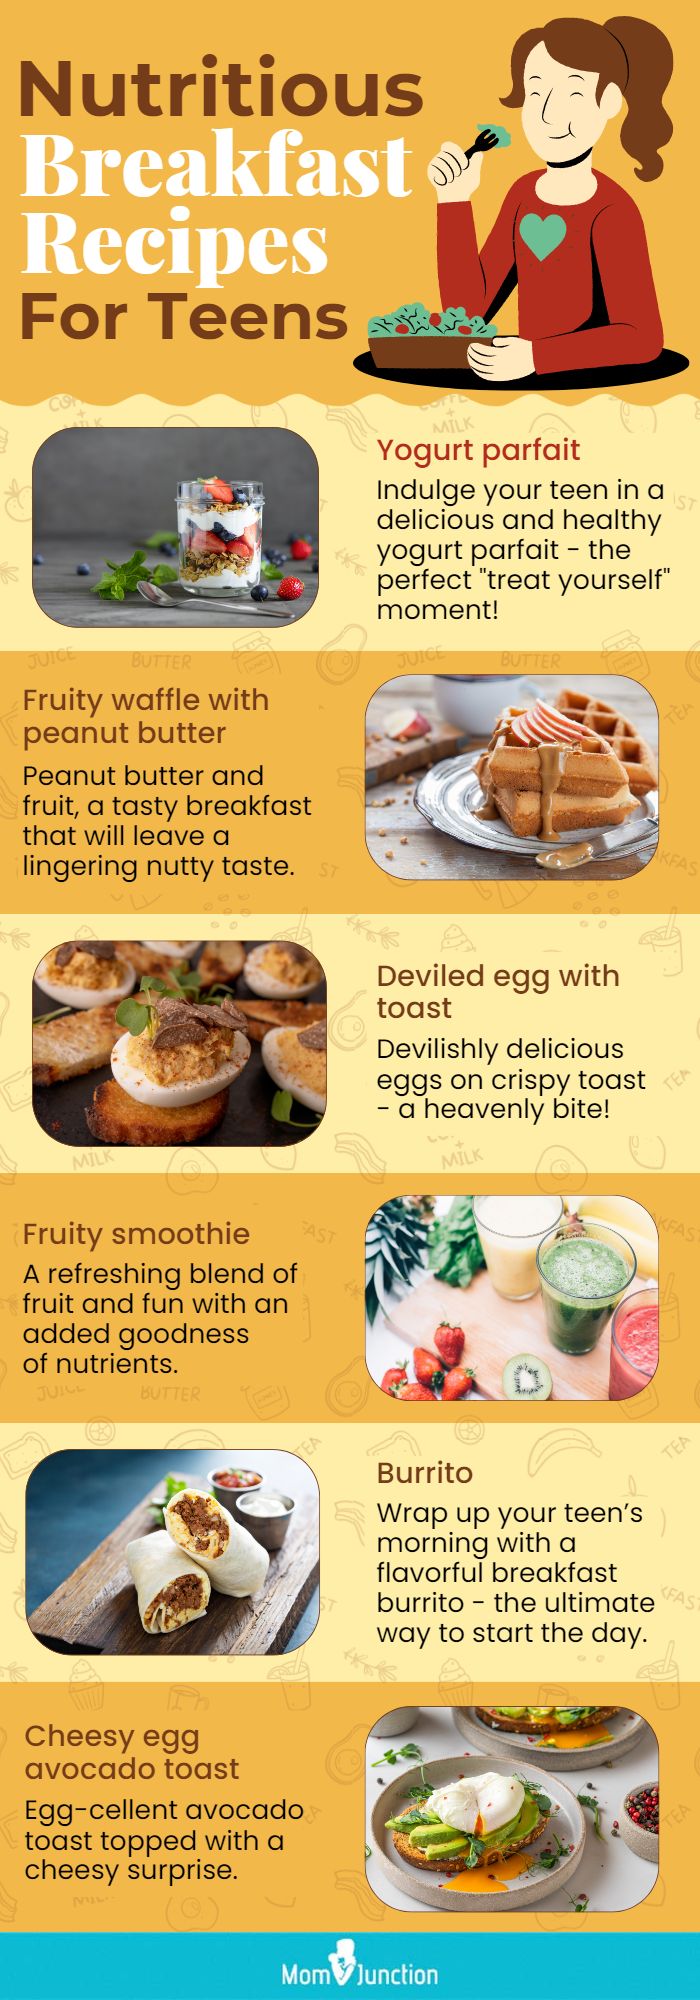 nutrient profiles of breakfast recipes for teens (infographic)